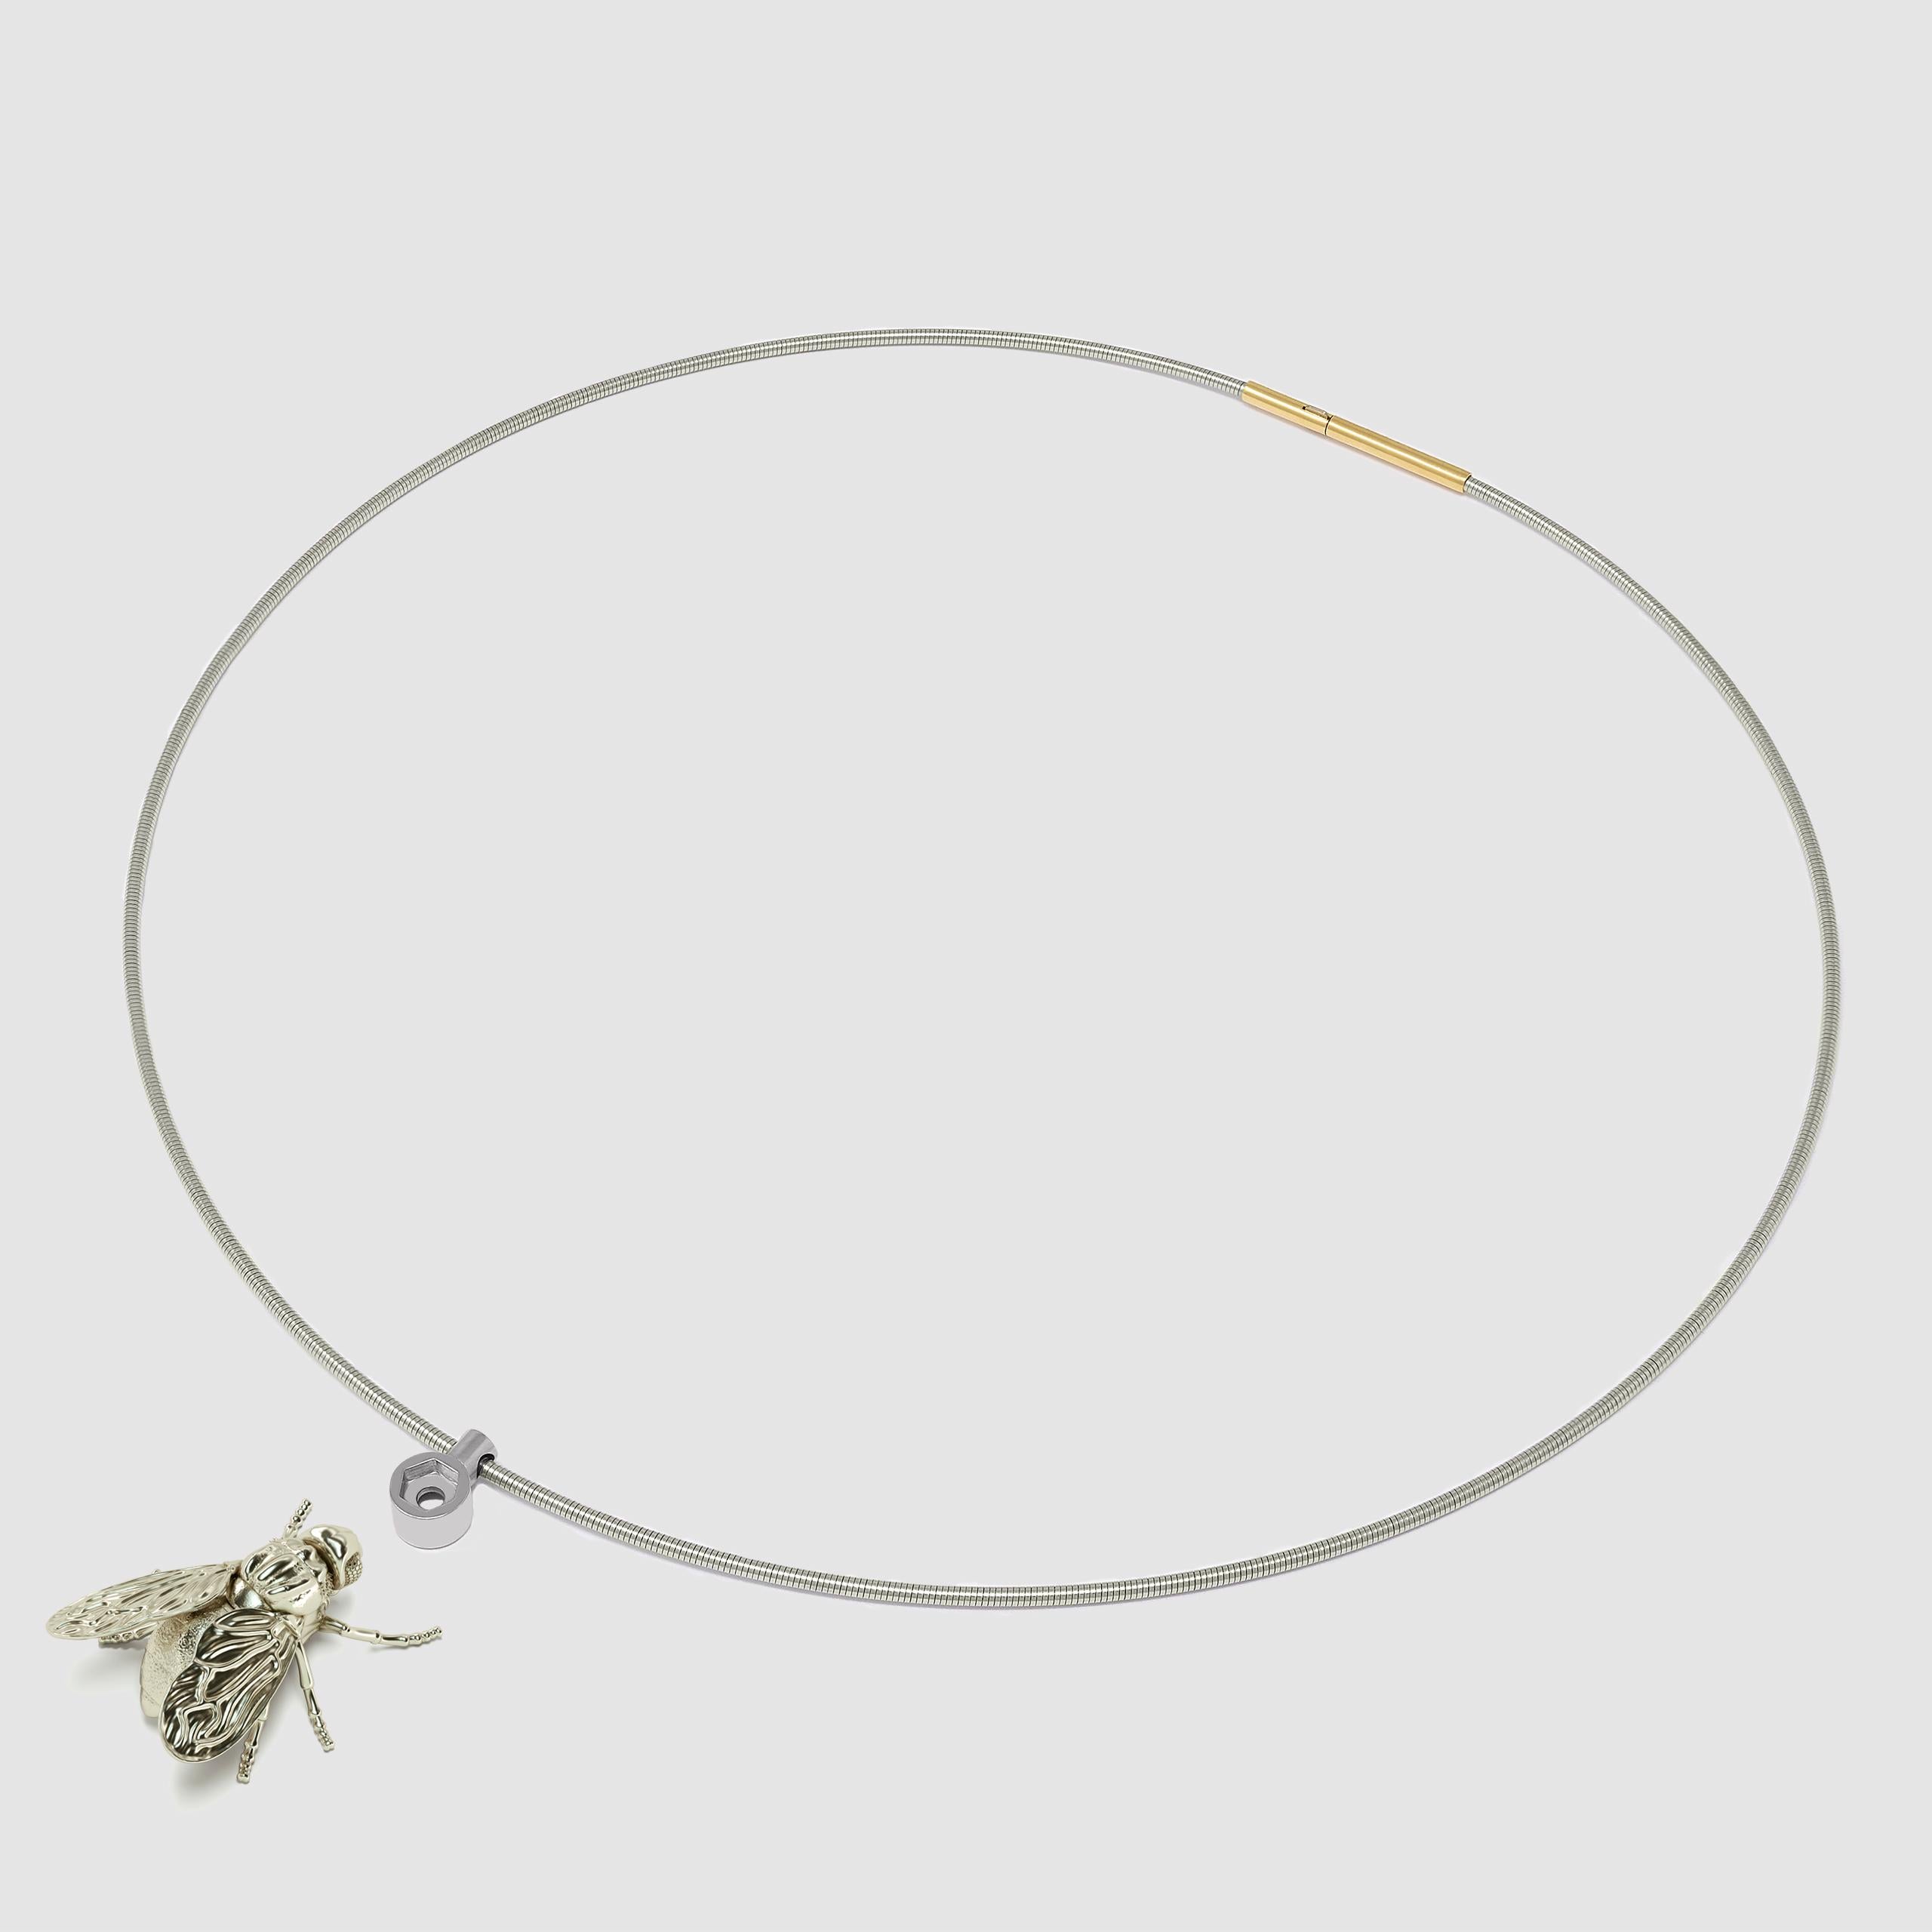 Necklace with Pendant Fly, 18K and Surgical Steel
·Flexible steel necklace with clasp of yellow gold, 18K
·Pendant Fly in White Gold, 18K

You can mount or remove the Fly from the Necklace. This is only possible with a surgical steel mechanism.